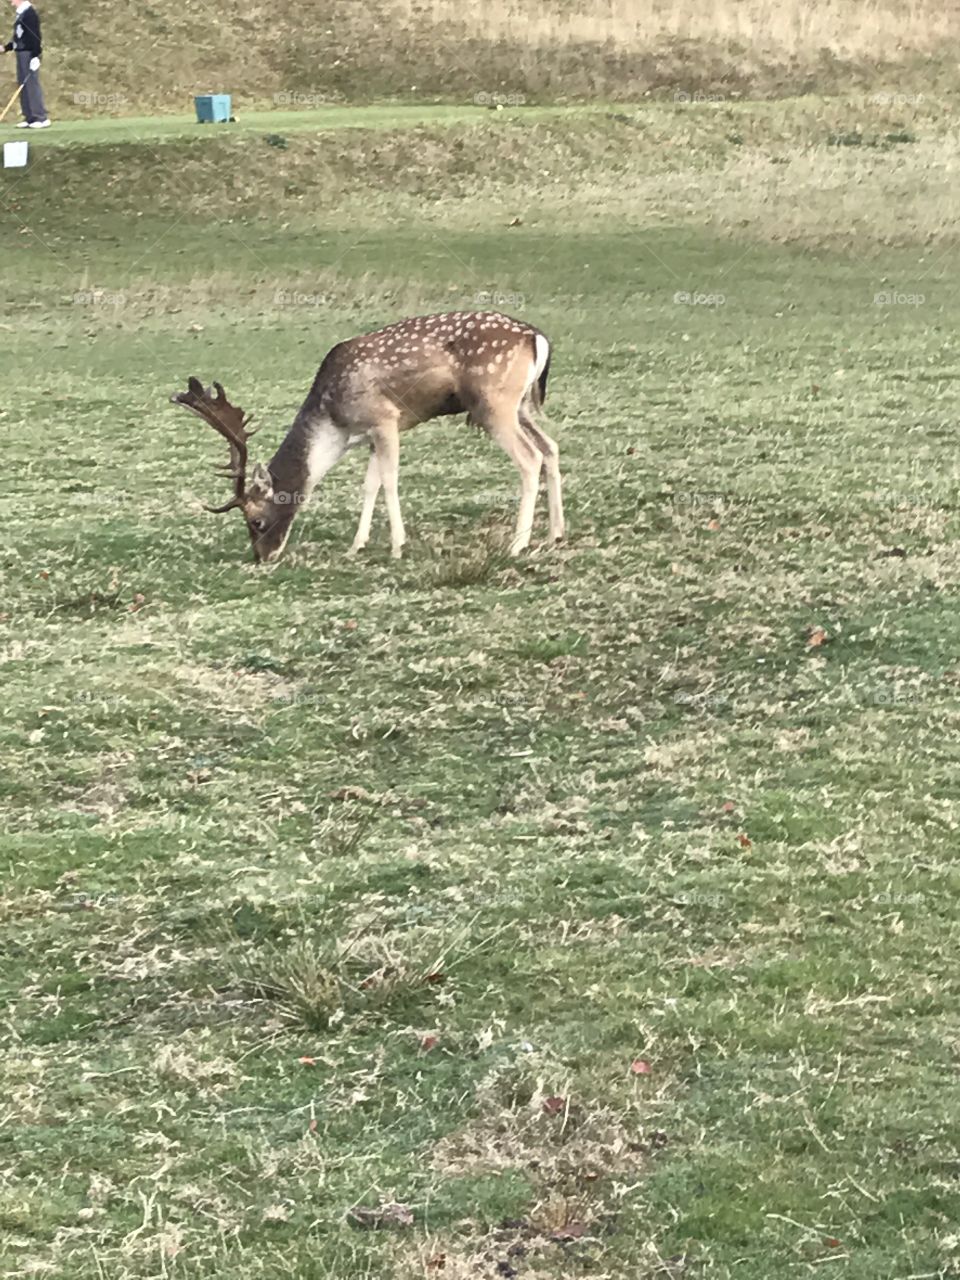 Stag eating grass
